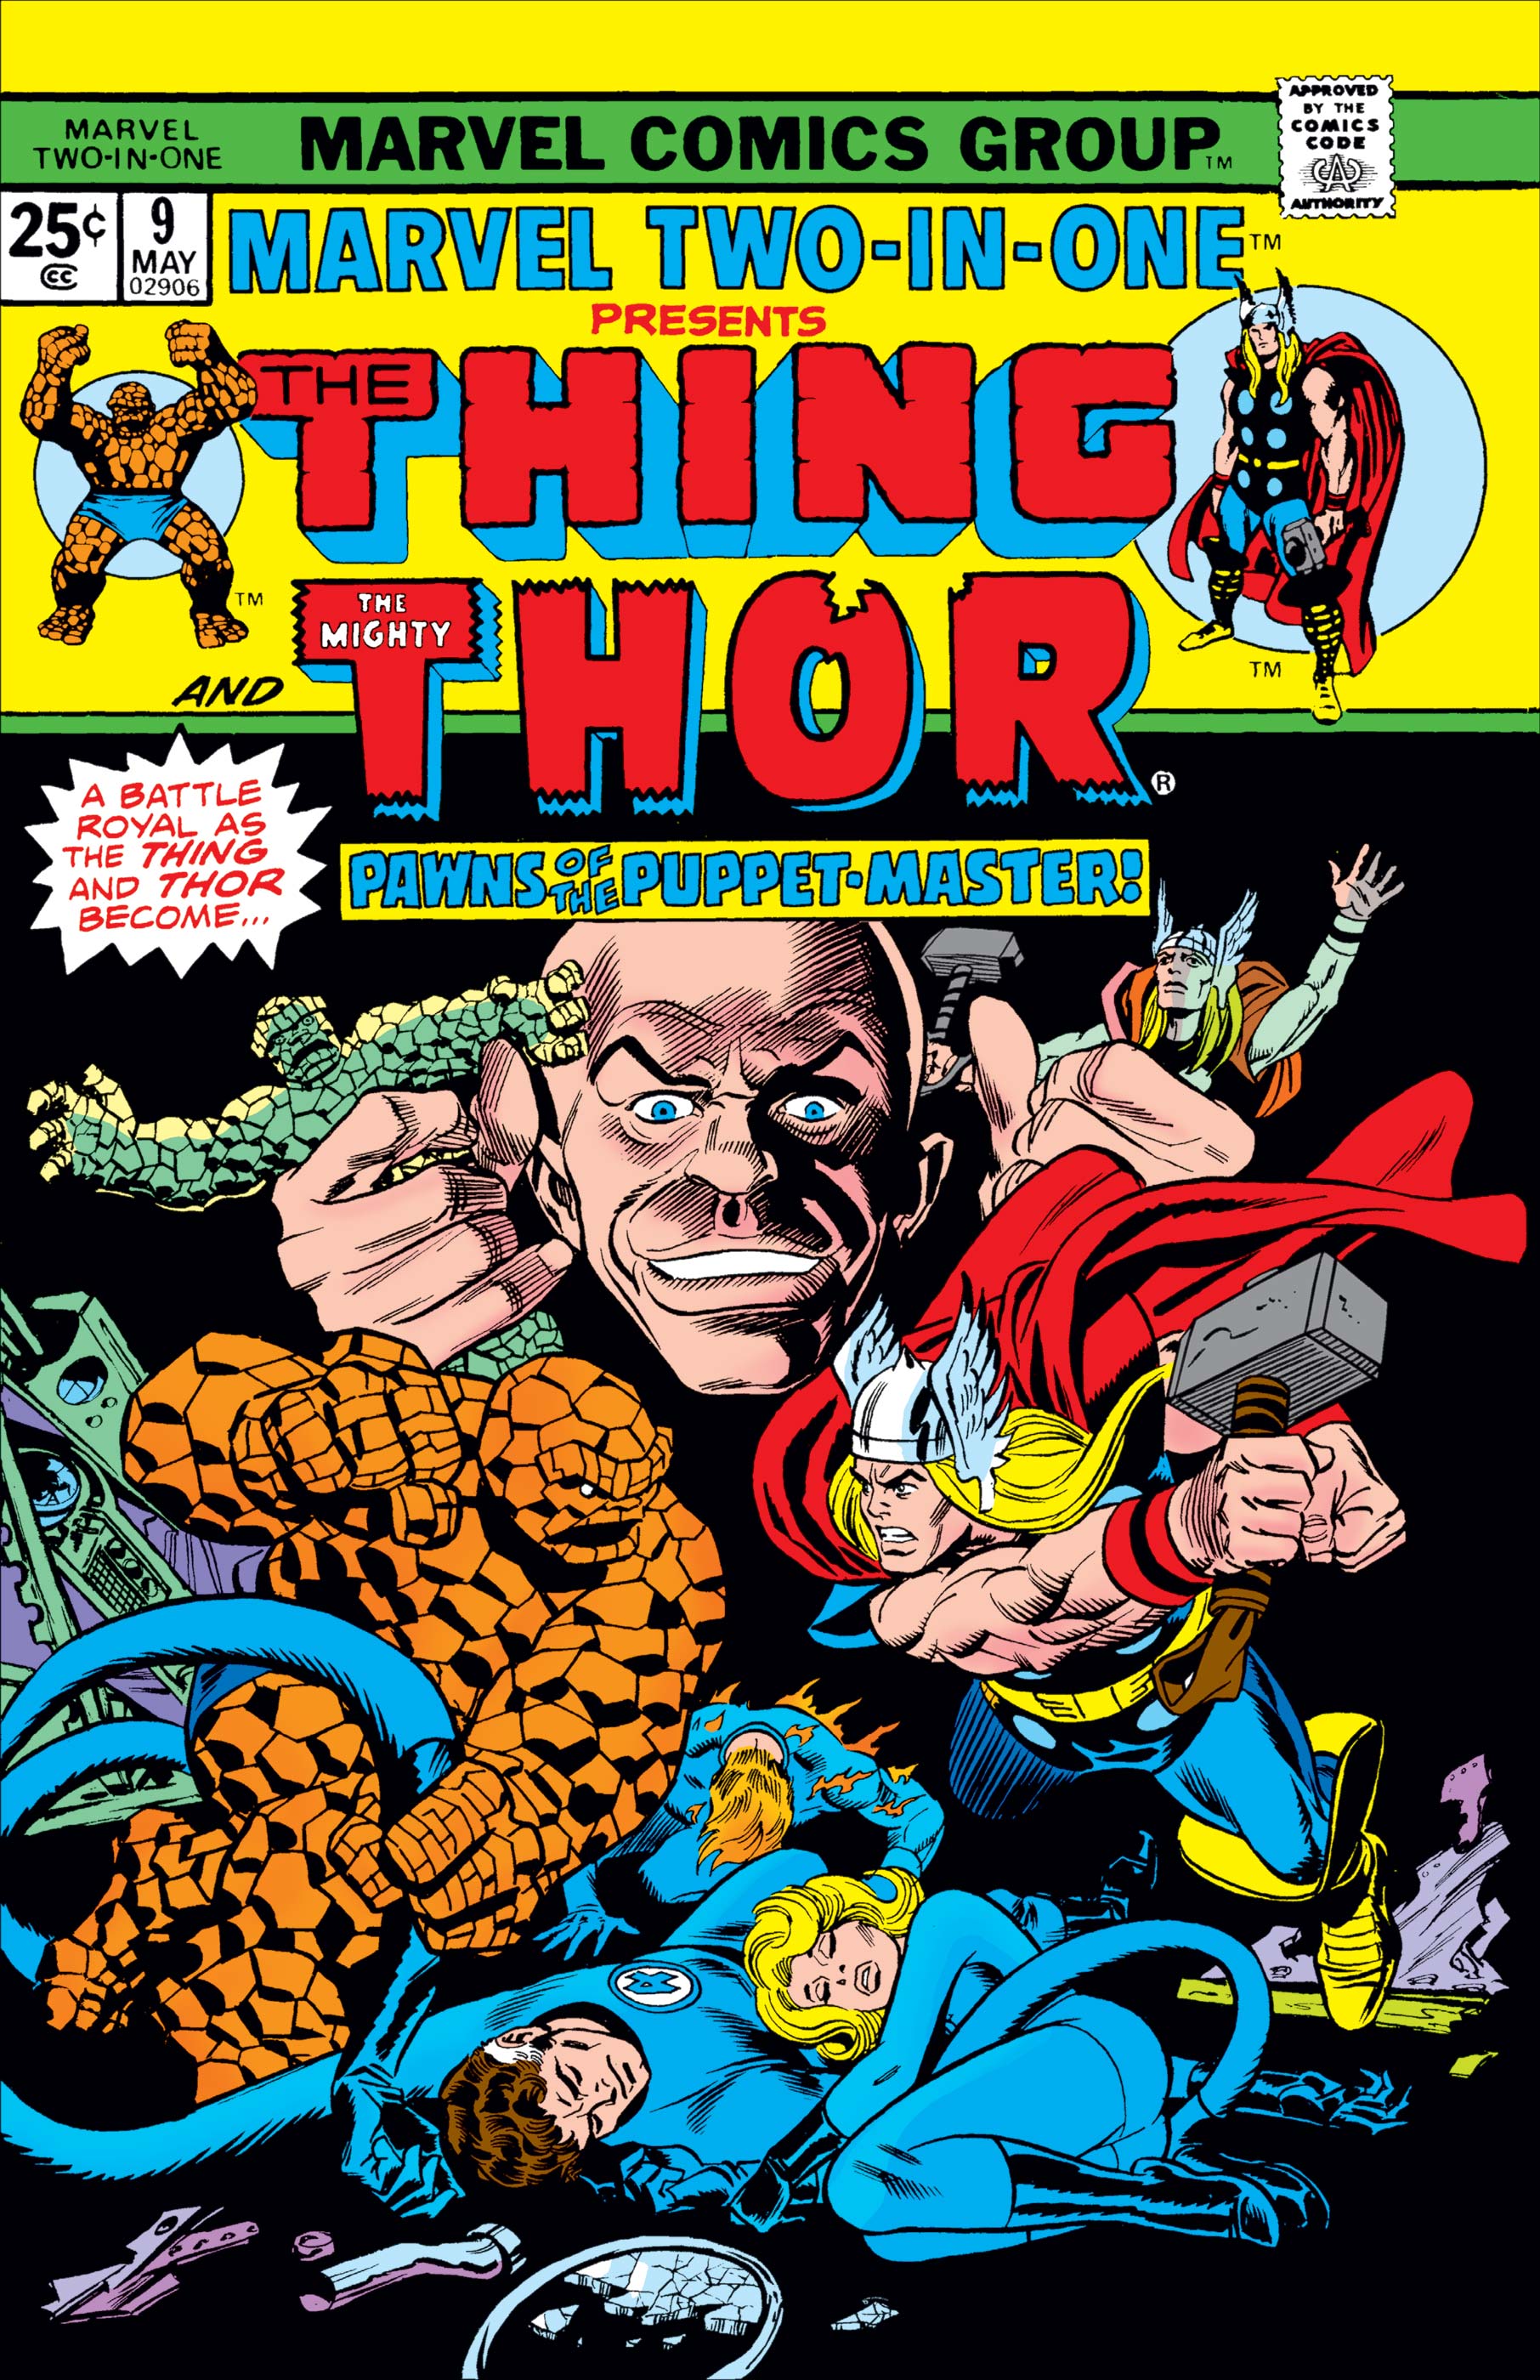 Marvel Two-in-One (1974) #9